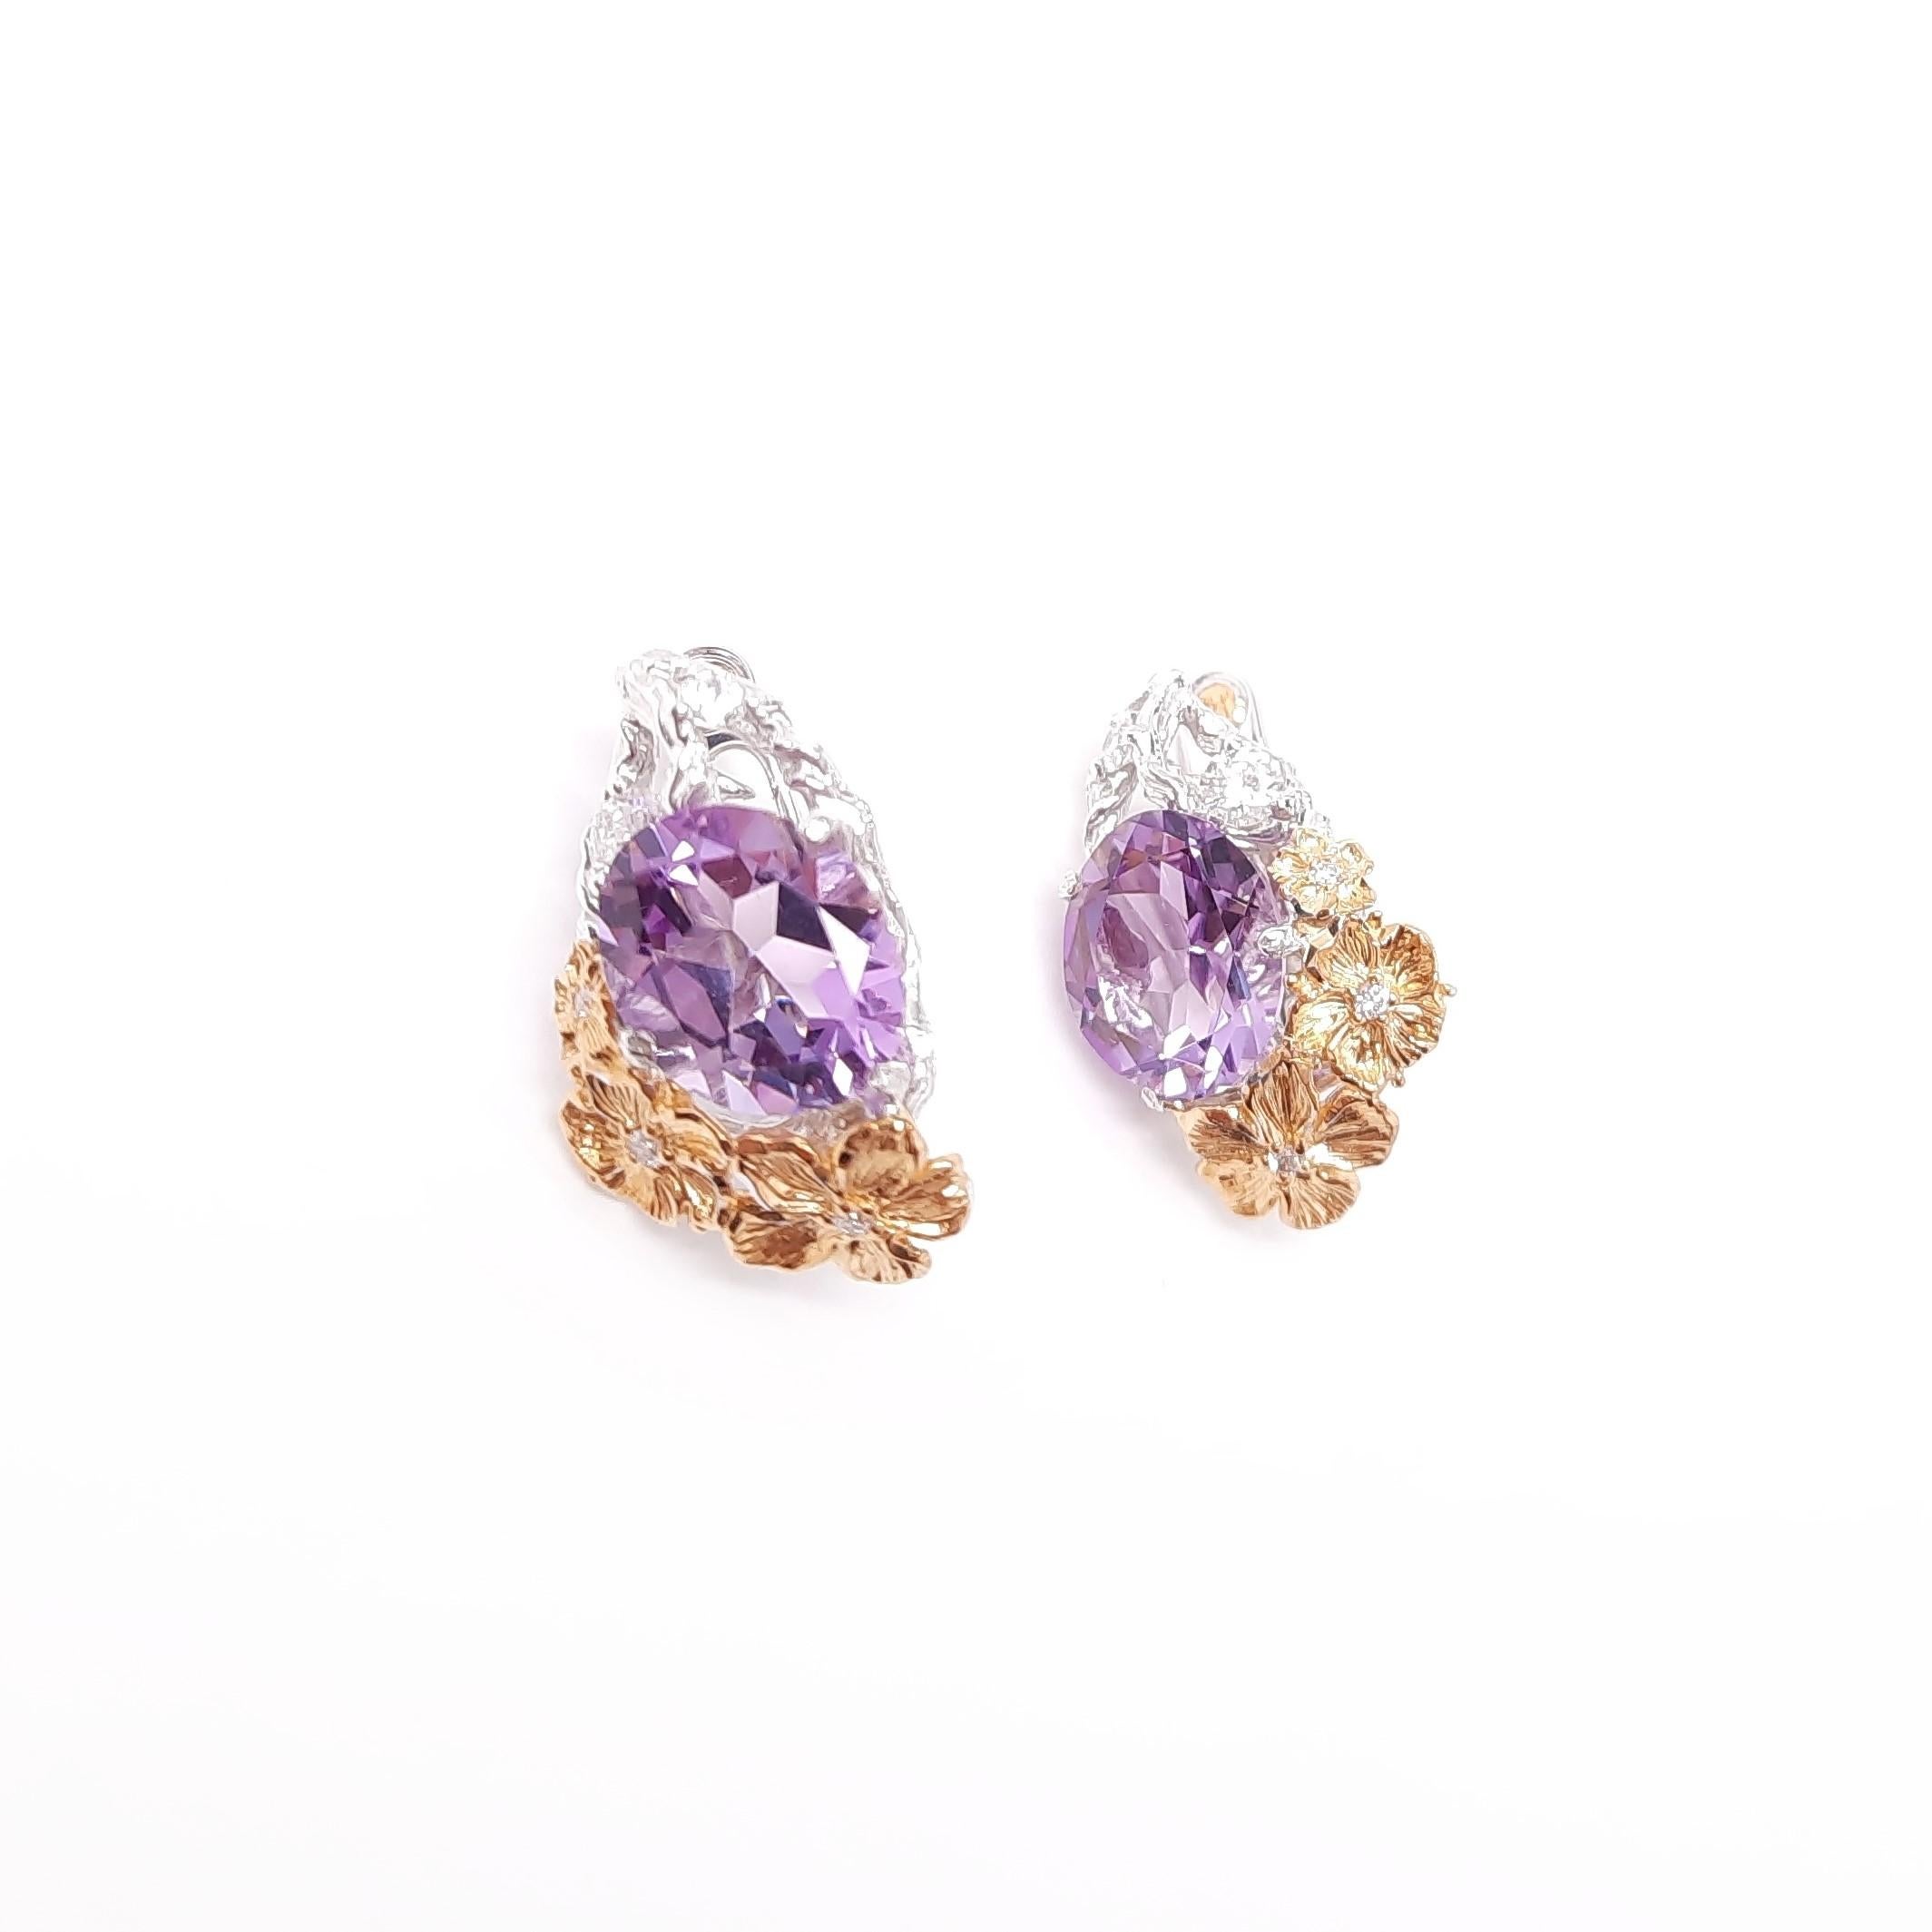 Inspired by Impressionism, MOISEIKIN® has created a blooming flower earrings with fine pinkish amethyst Trembling flowers and sweet fragrance of coming ripe fruits are embodied  in gems and metals. 
Gold filigree is detailed as branch which you feel